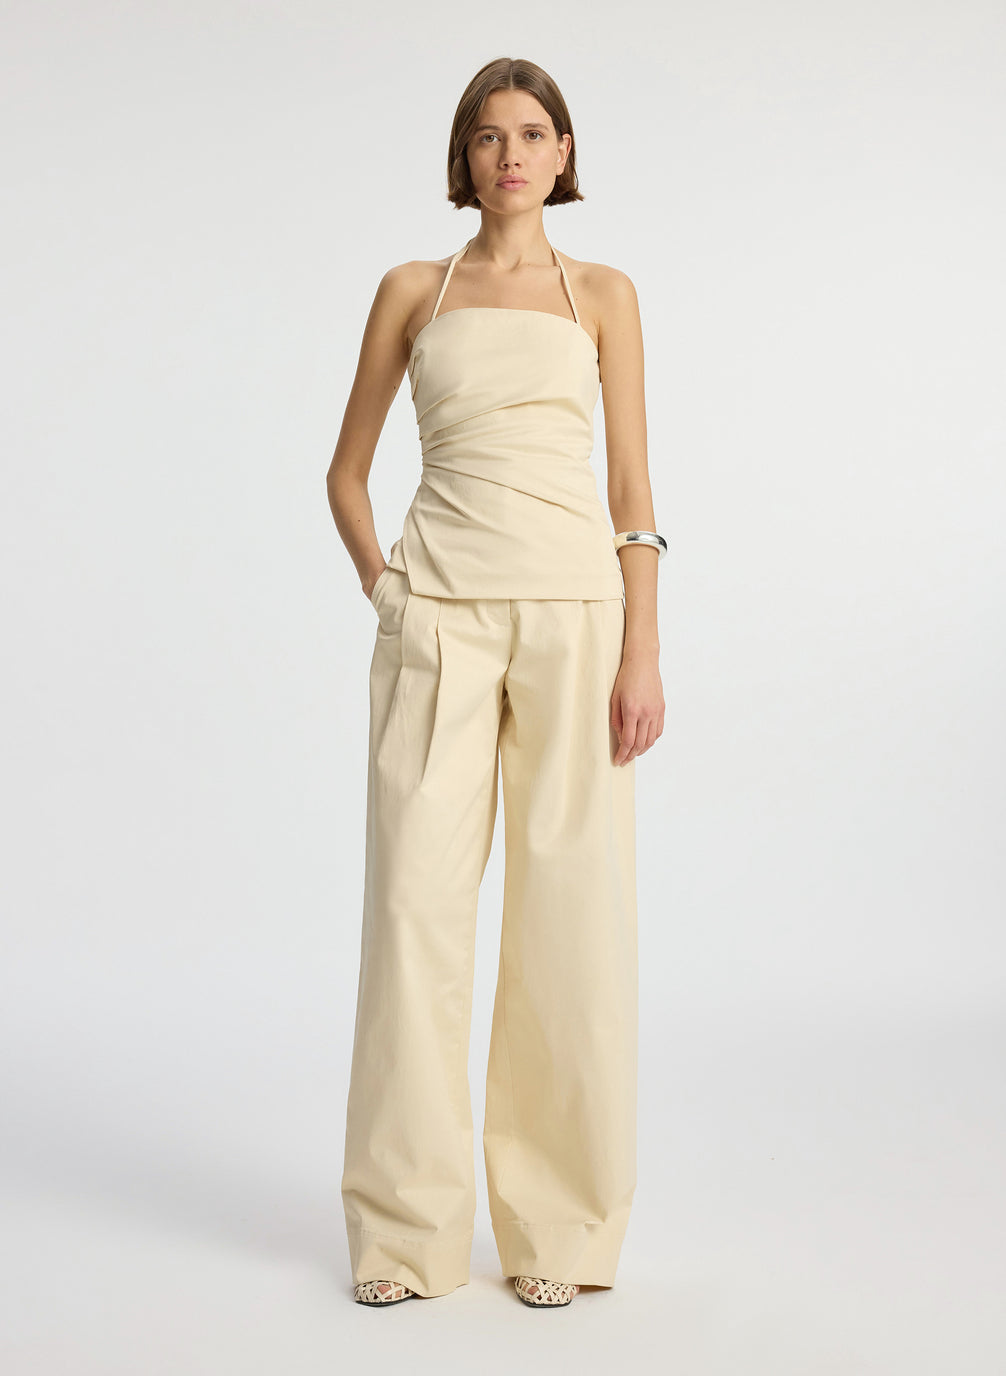 front  view of woman wearing beige halter top with side ruching and beige wide leg pant